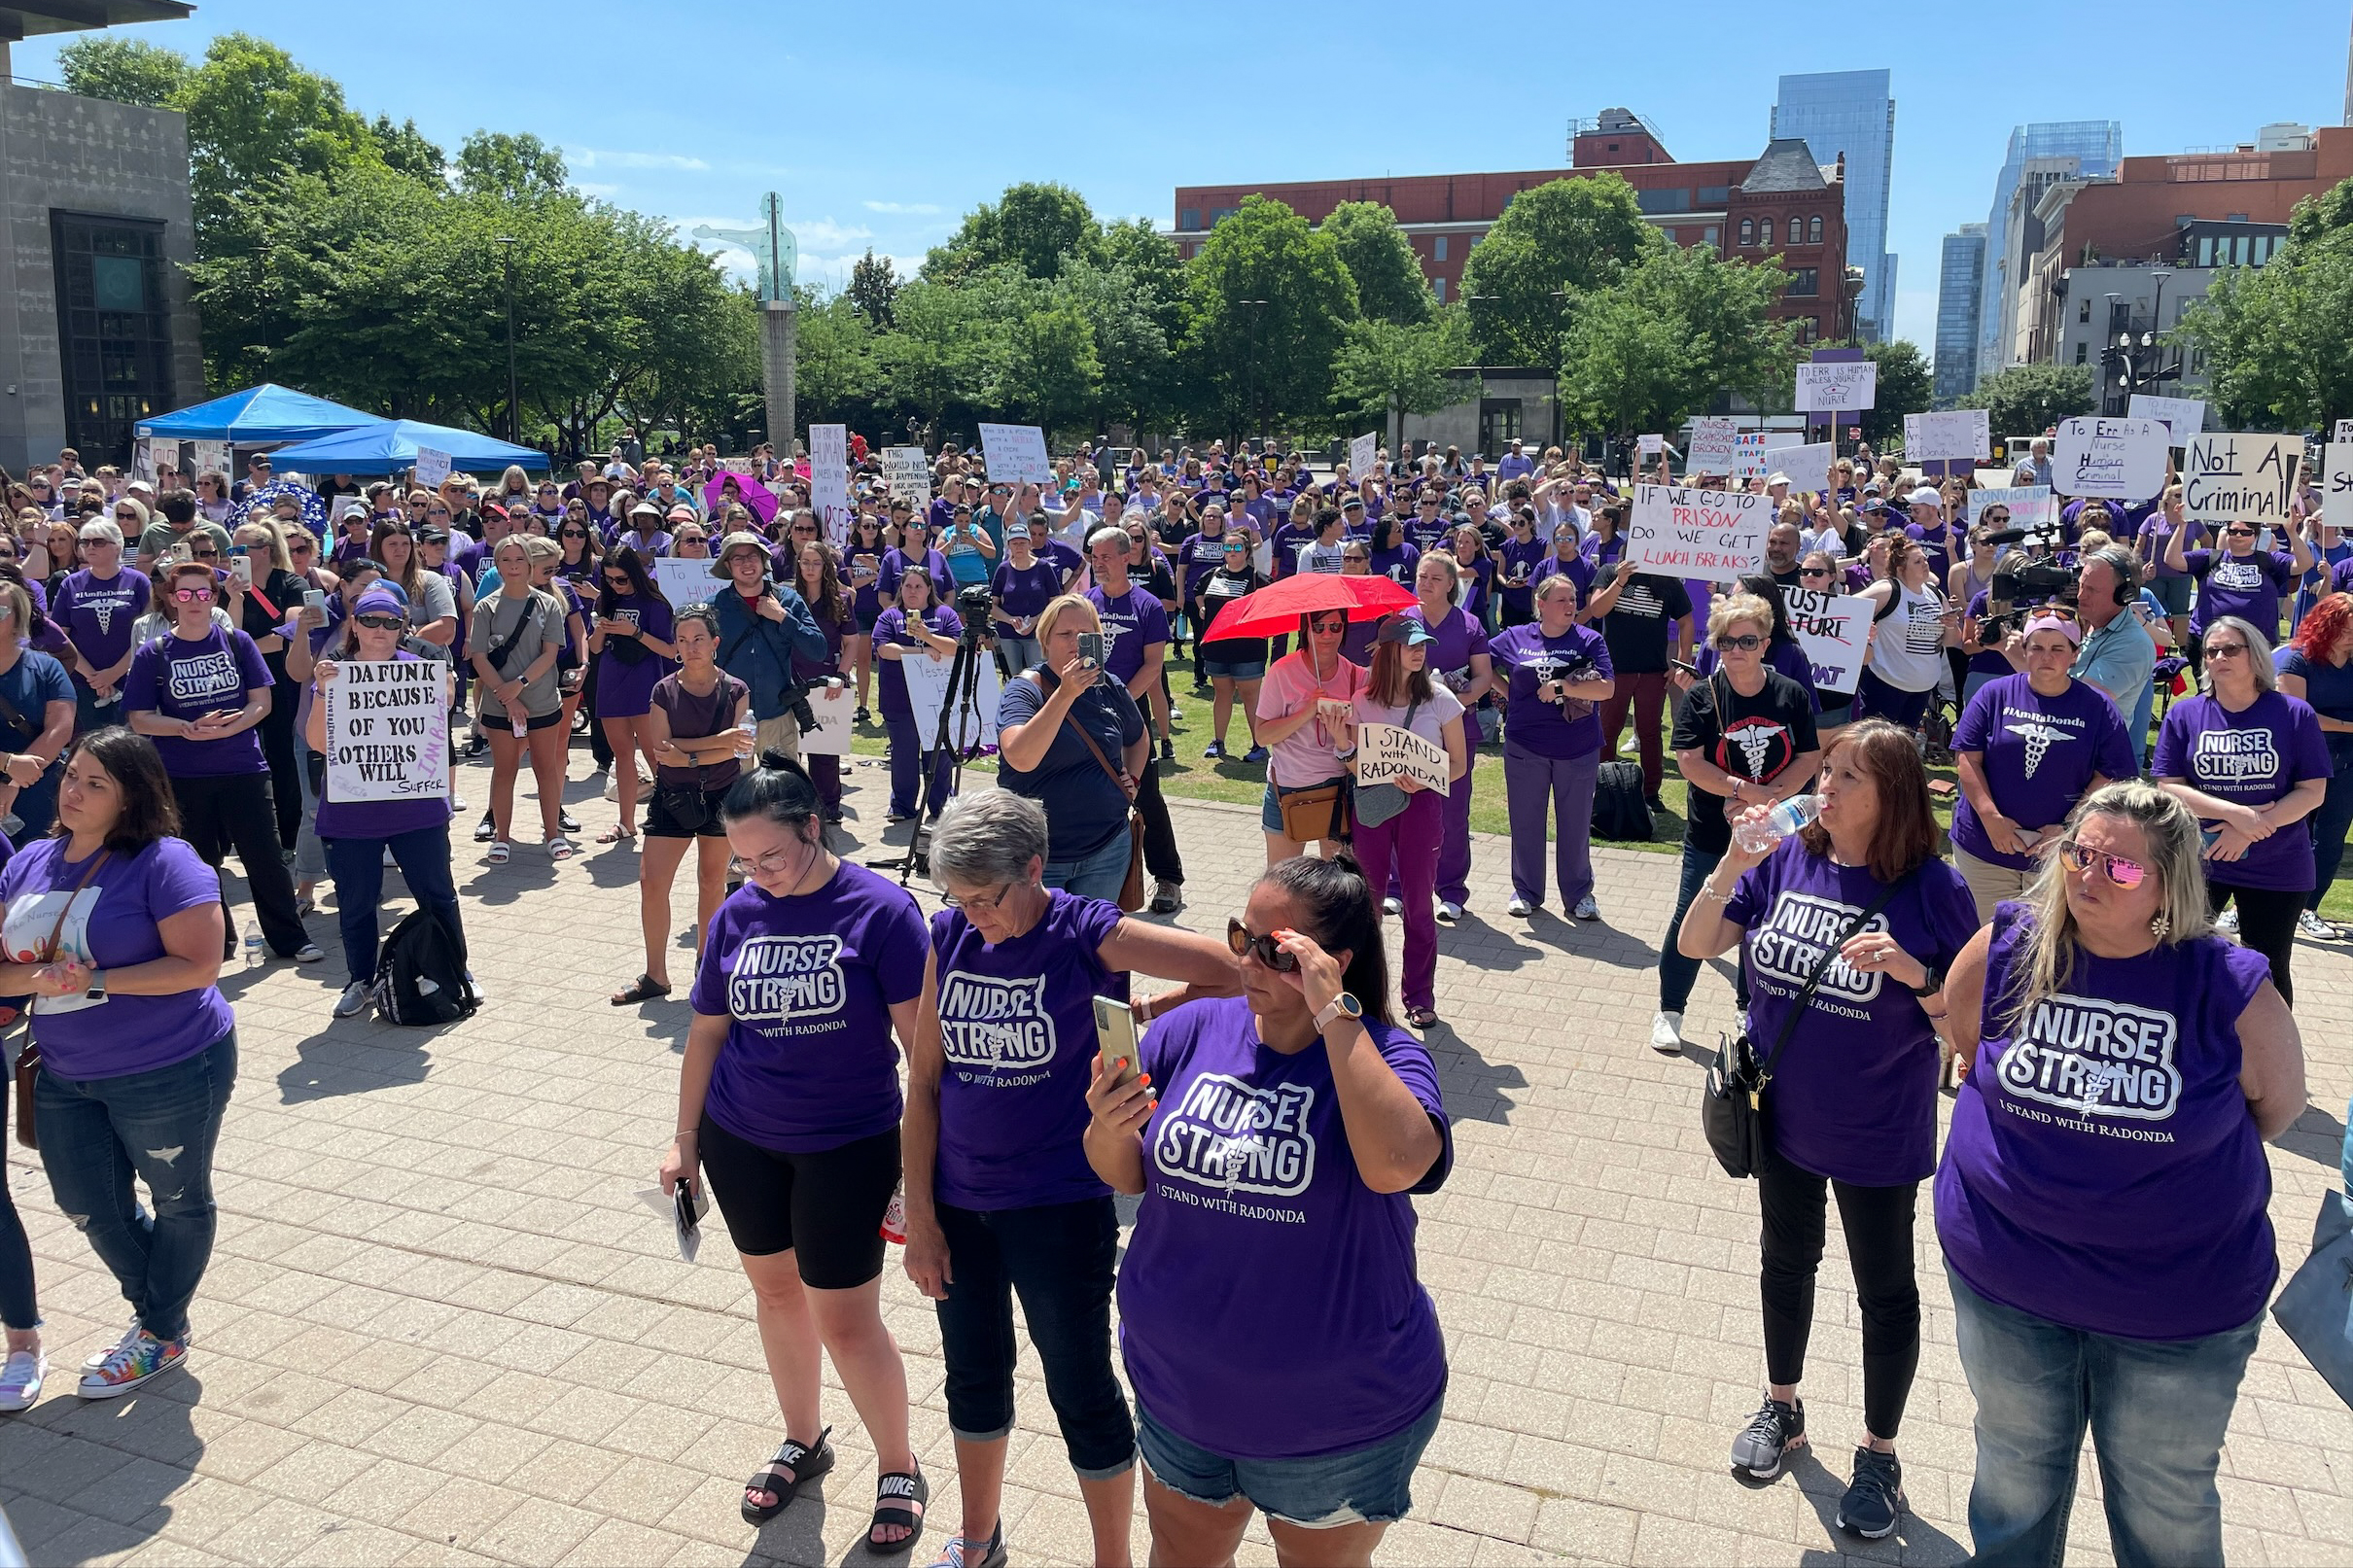 A crowd of hundreds is seen gathered near the Davidson County Courthouse in Nashville. The demostrators wear purple shirts that read, 